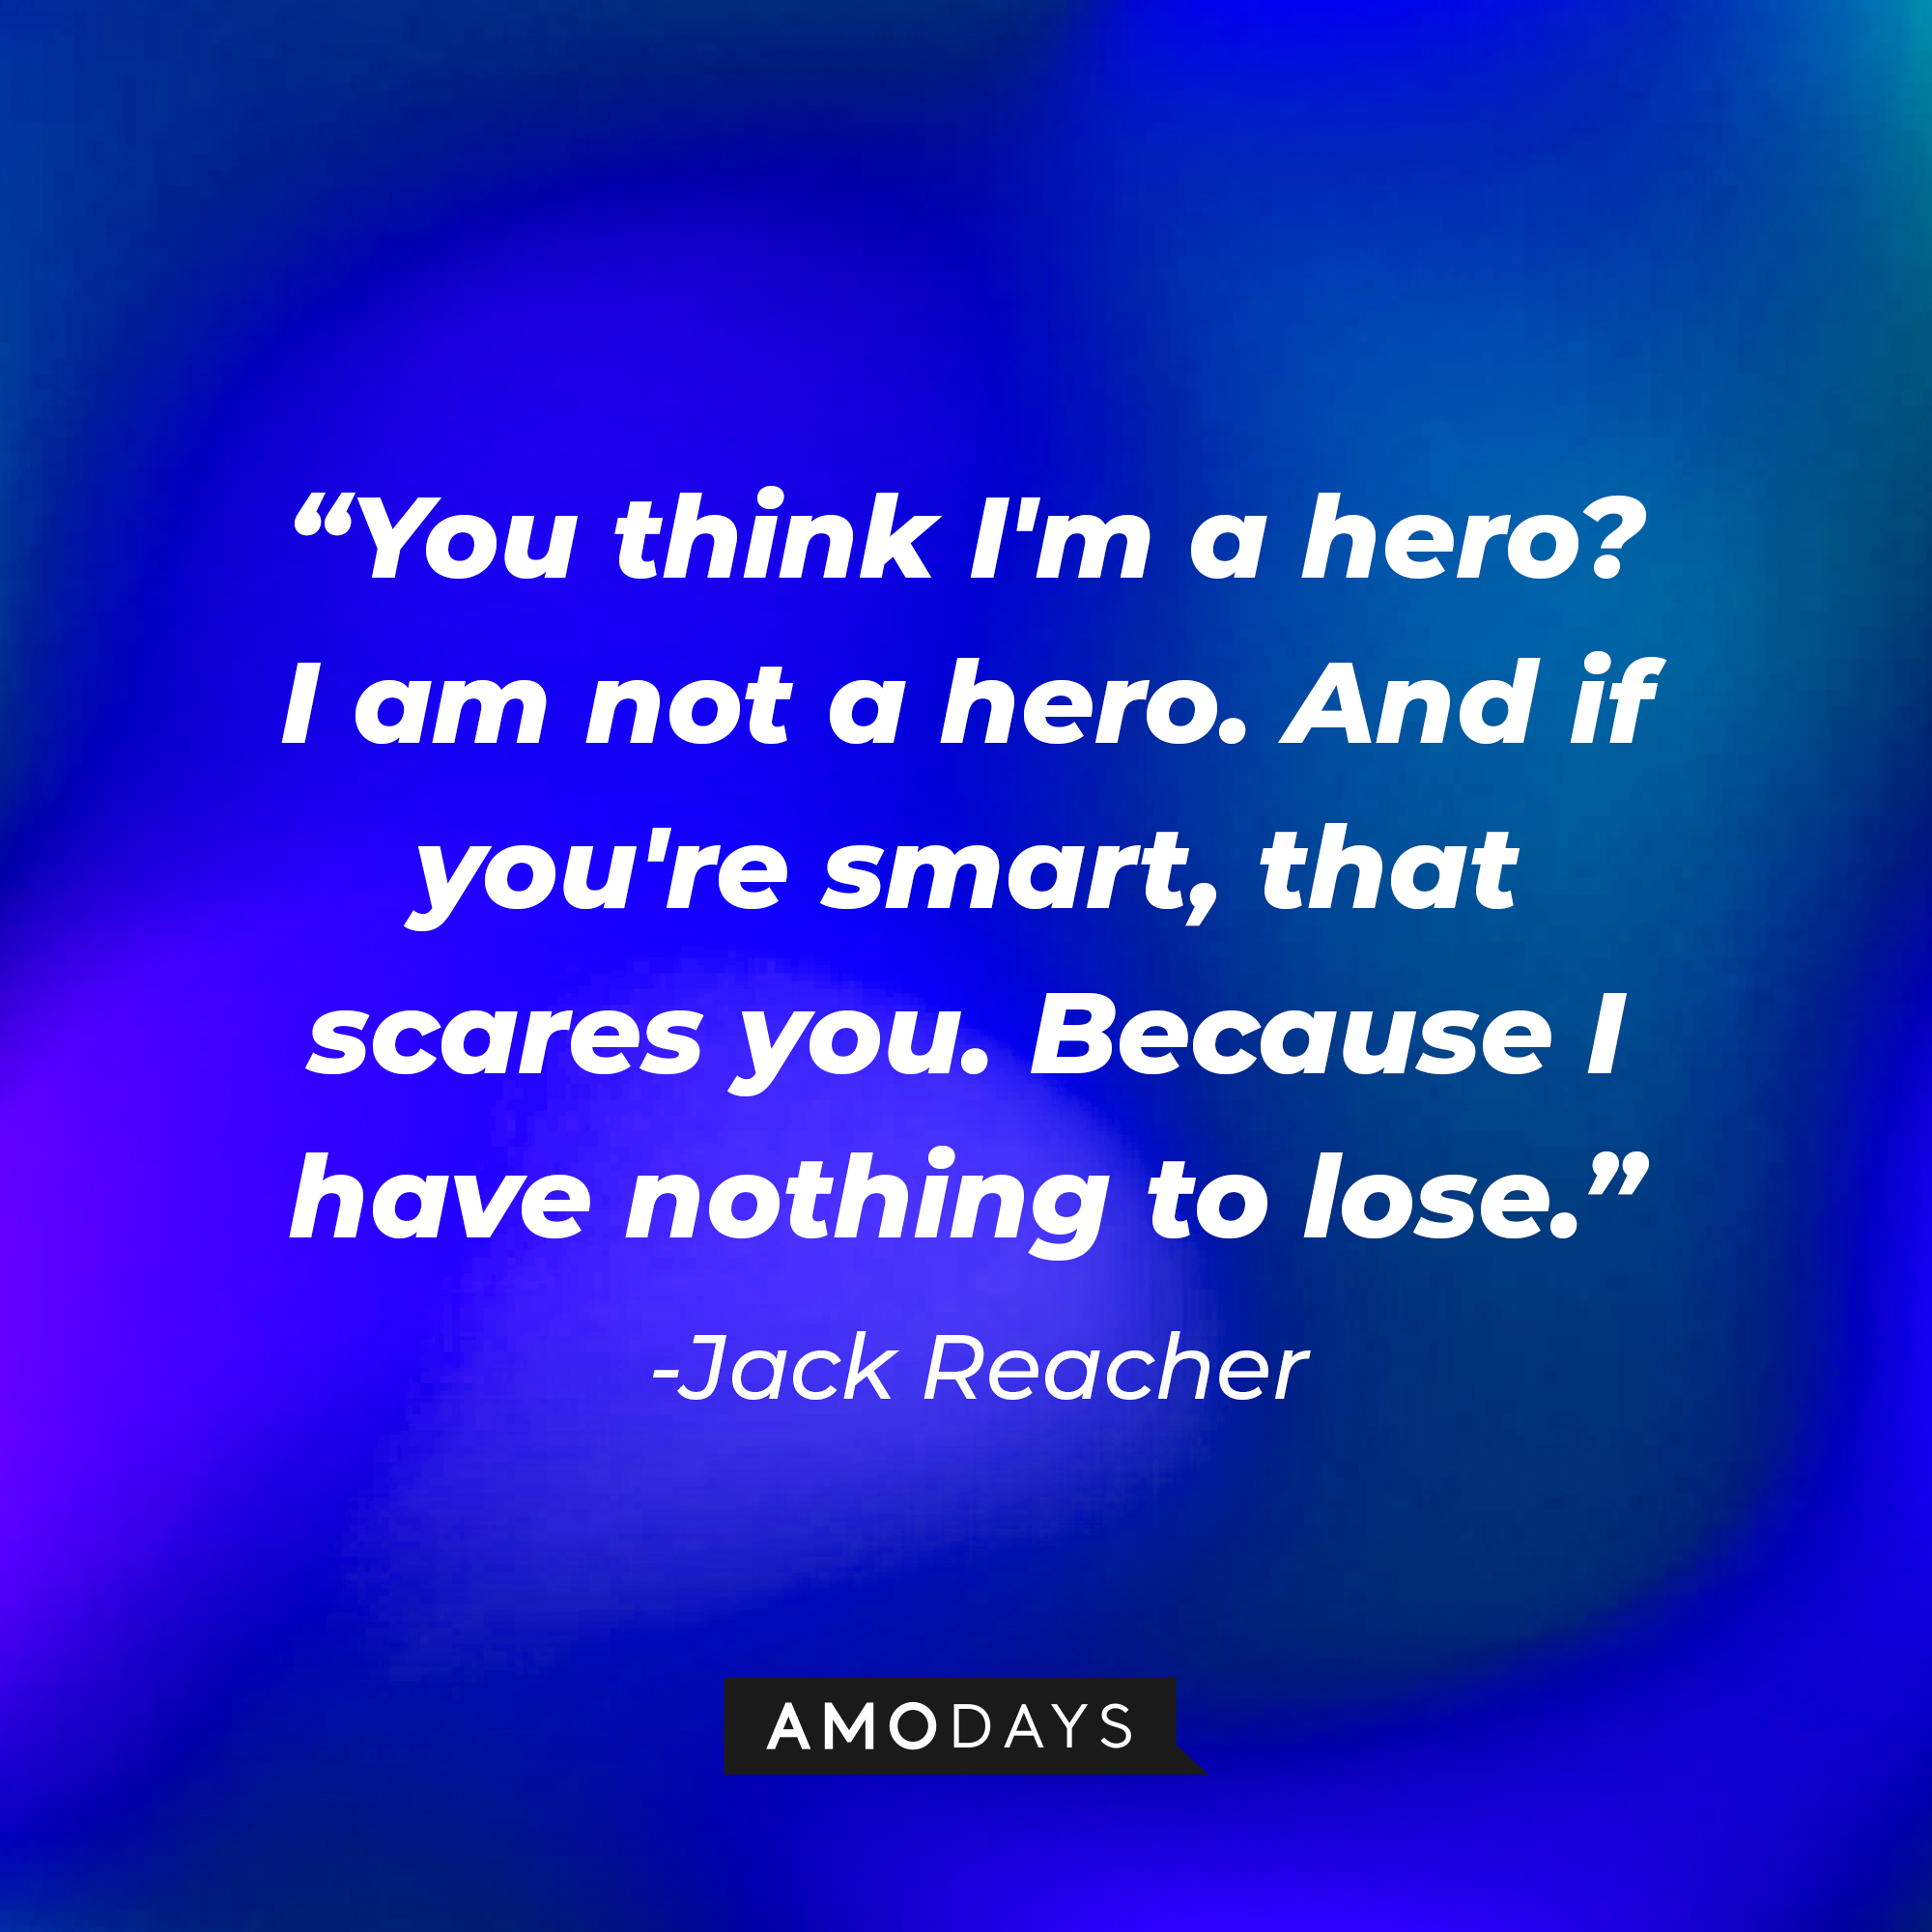 Jack Reacher's quote: "You think I'm a hero? I am not a hero. And if you're smart, that scares you. Because I have nothing to lose" | Source: Amodays